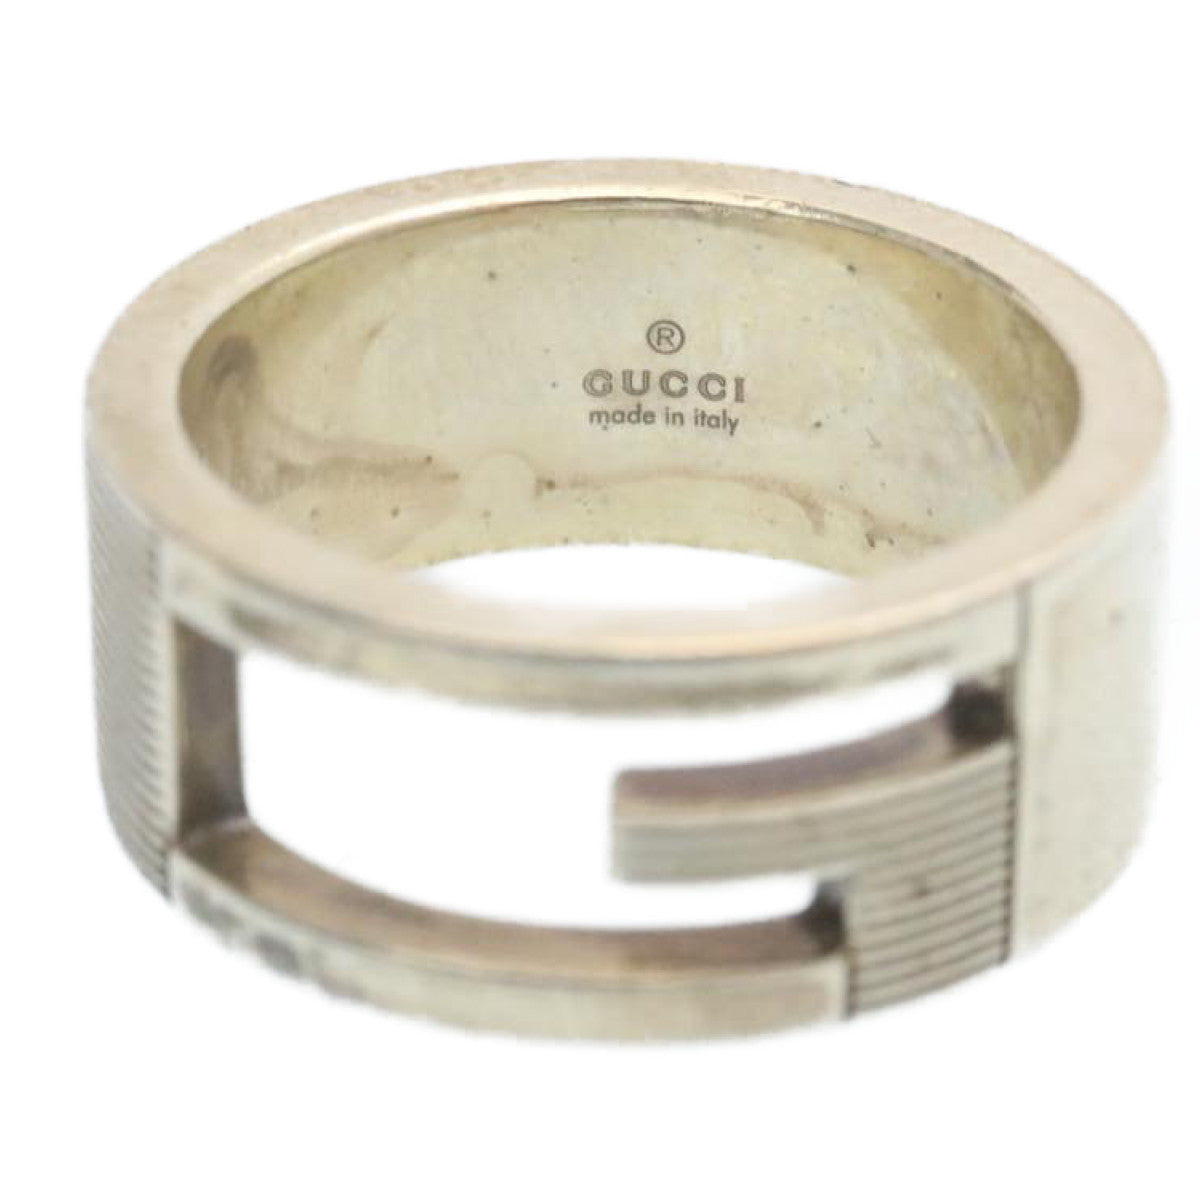 GUCCI Ring 2 Set size 7 and 16 Silver Auth am2085g